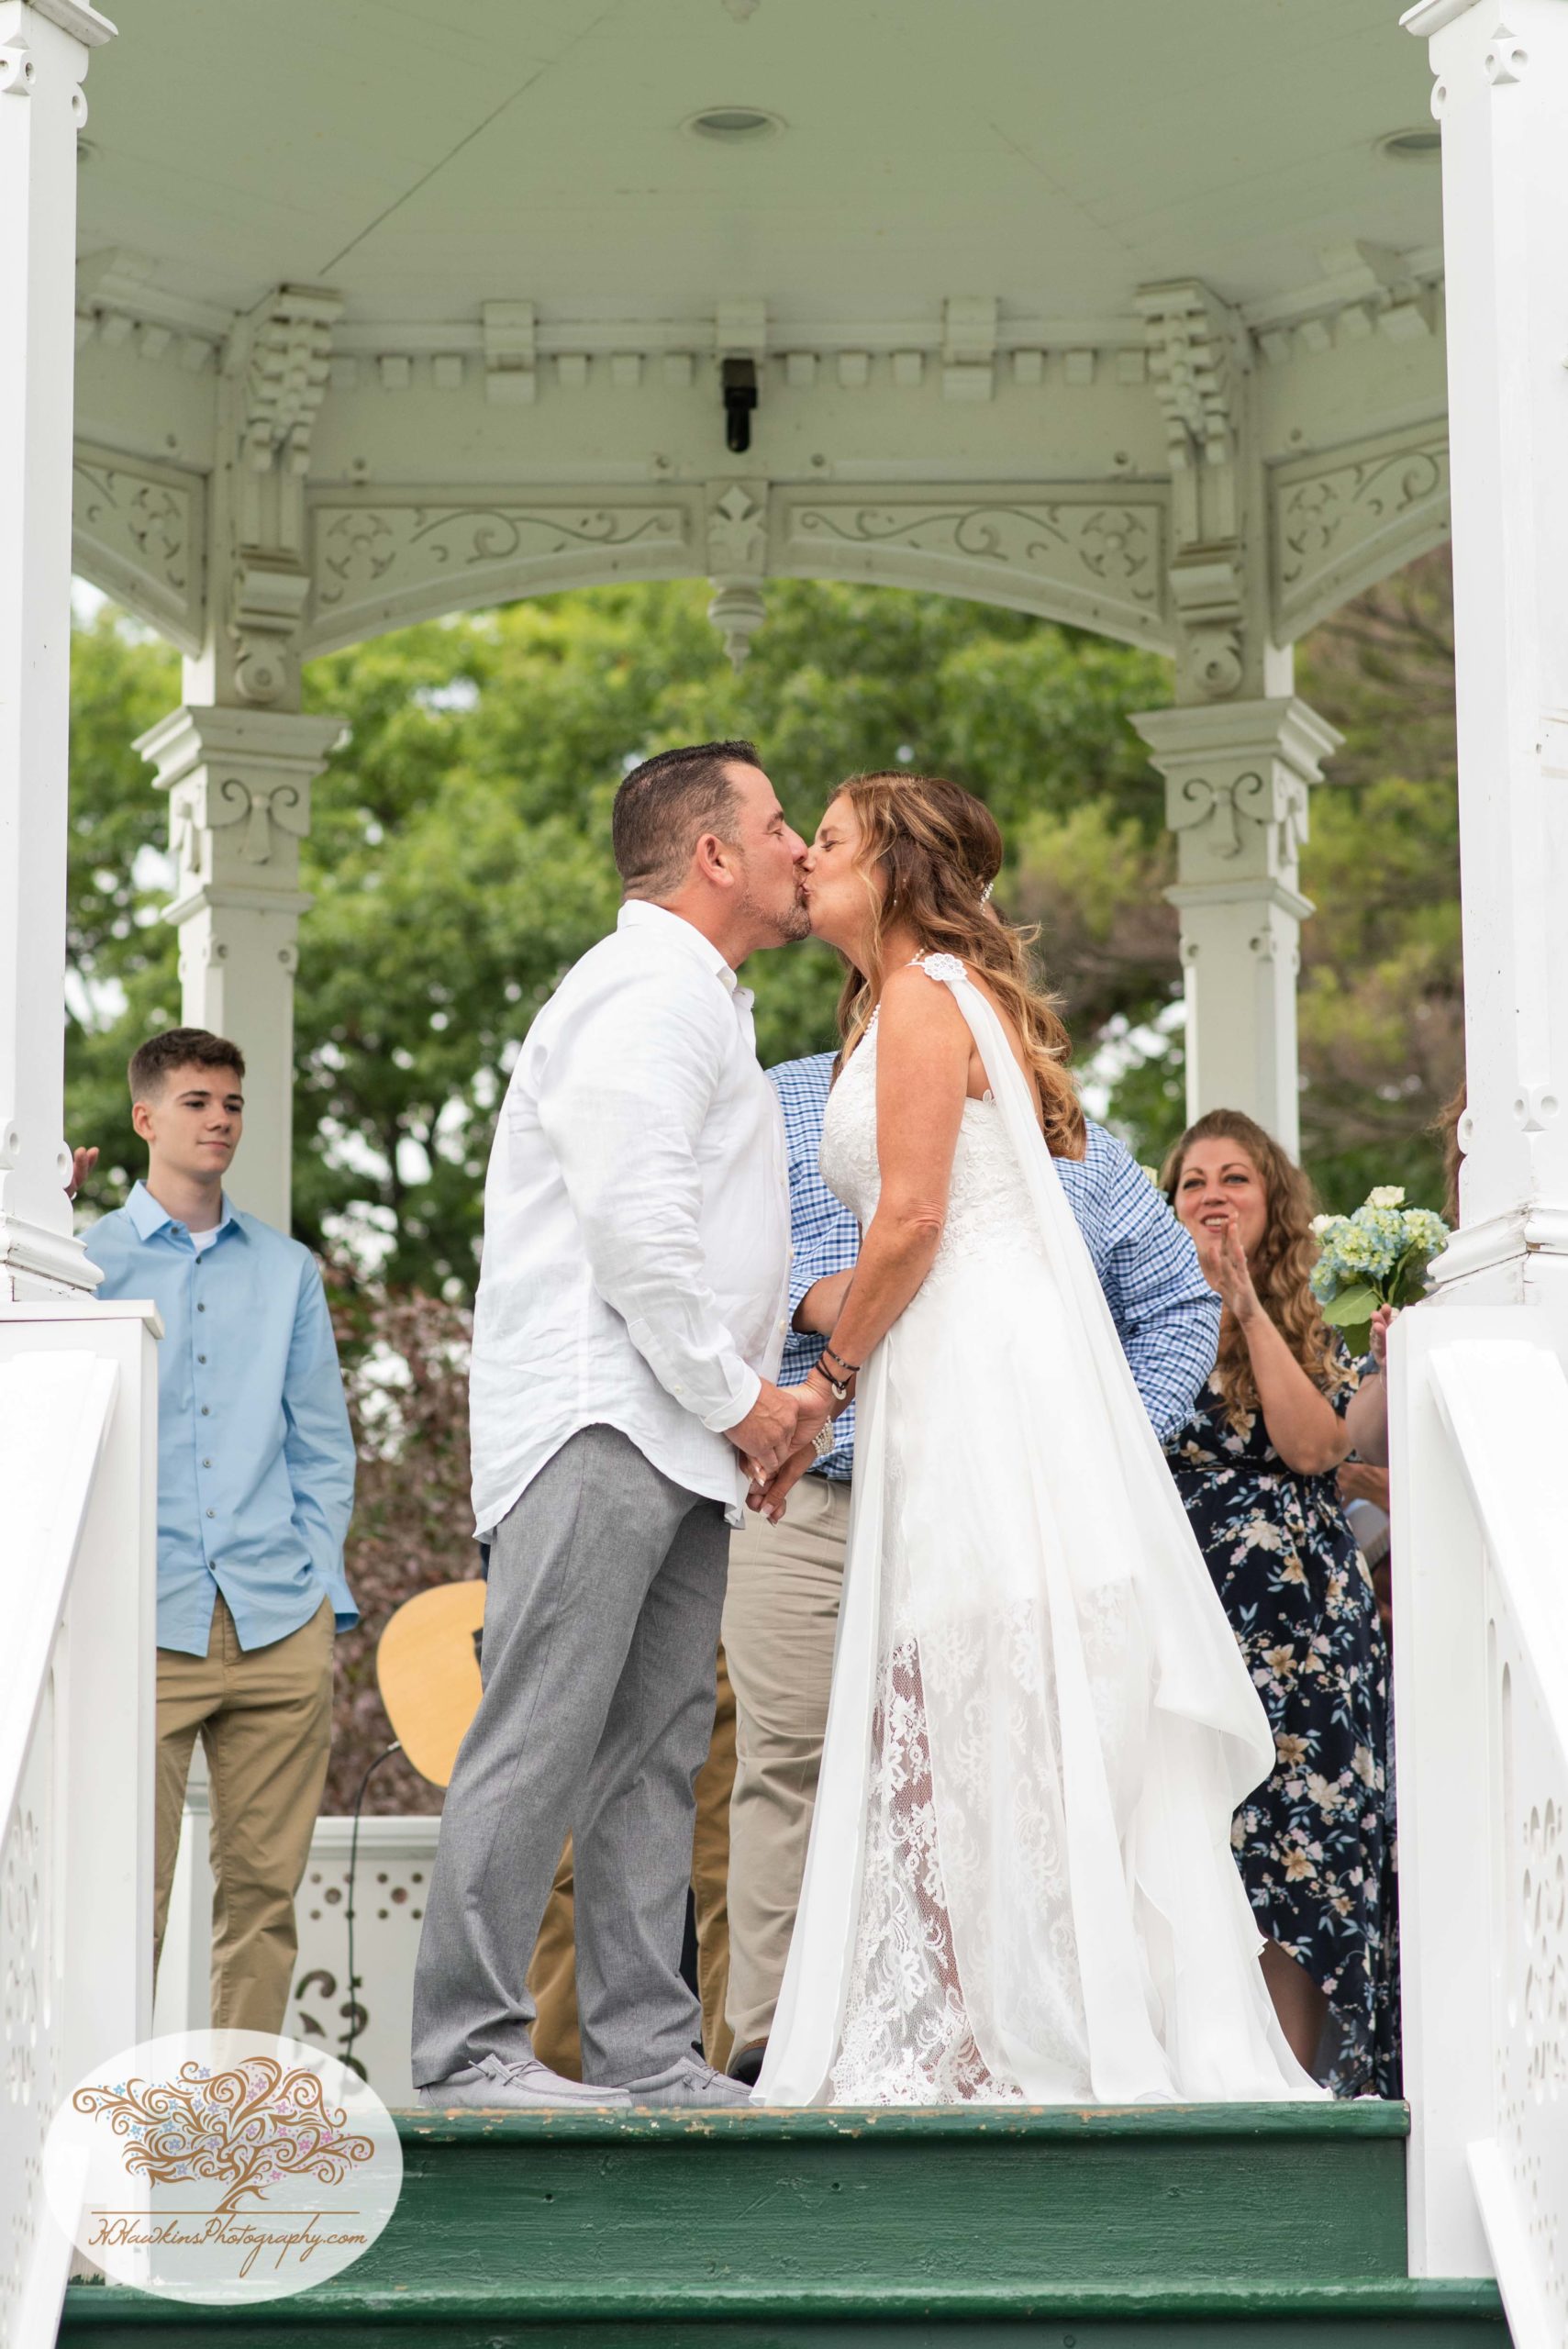 Bride and groom kiss in the gazebo at Hoopes Park in Auburn NY during the Fingerlakes Wedding by Syracuse photographer